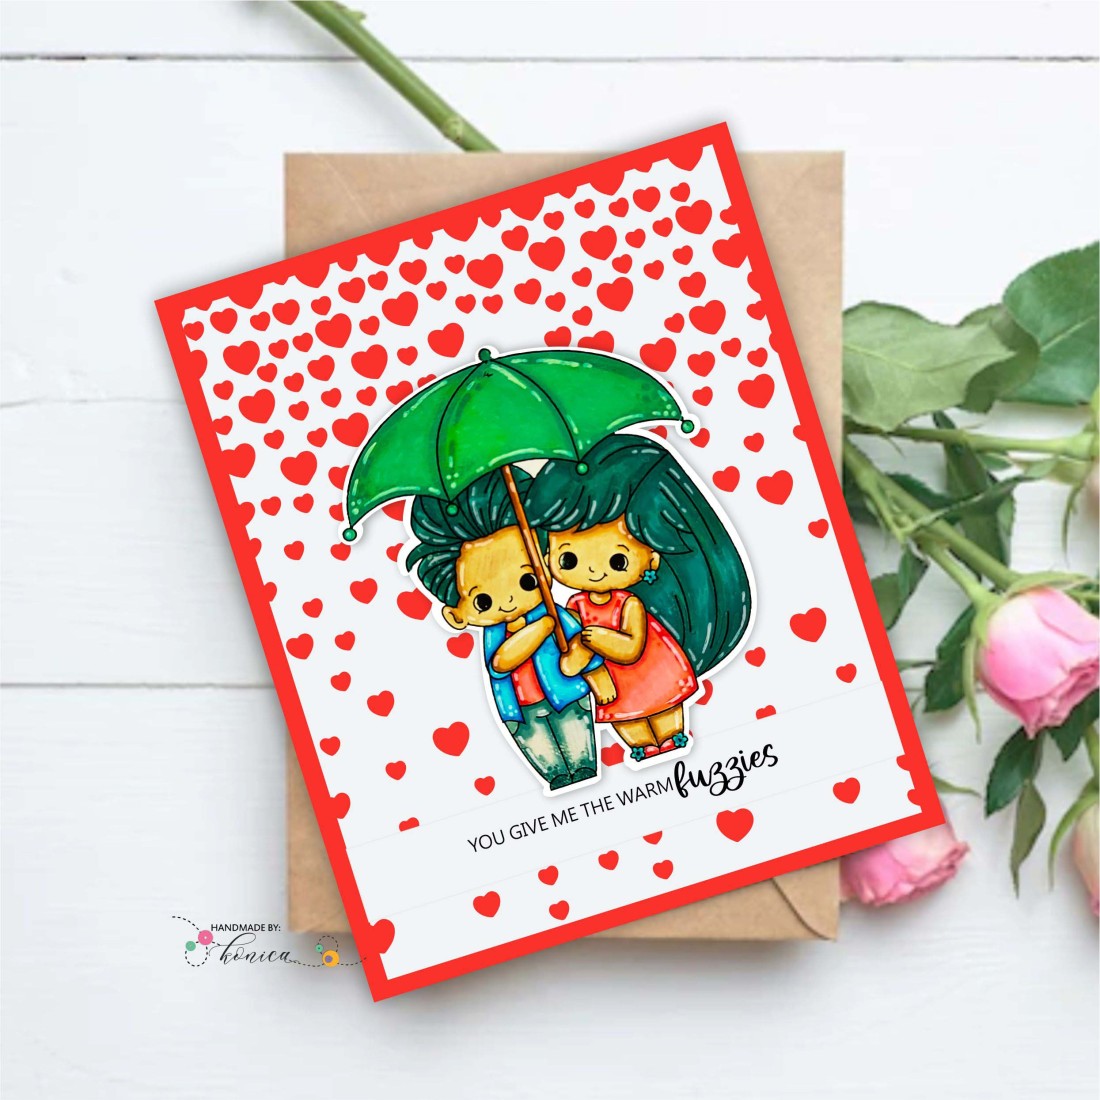 Craftyscrappers Stamps- FALLING HEARTS BACKGROUND